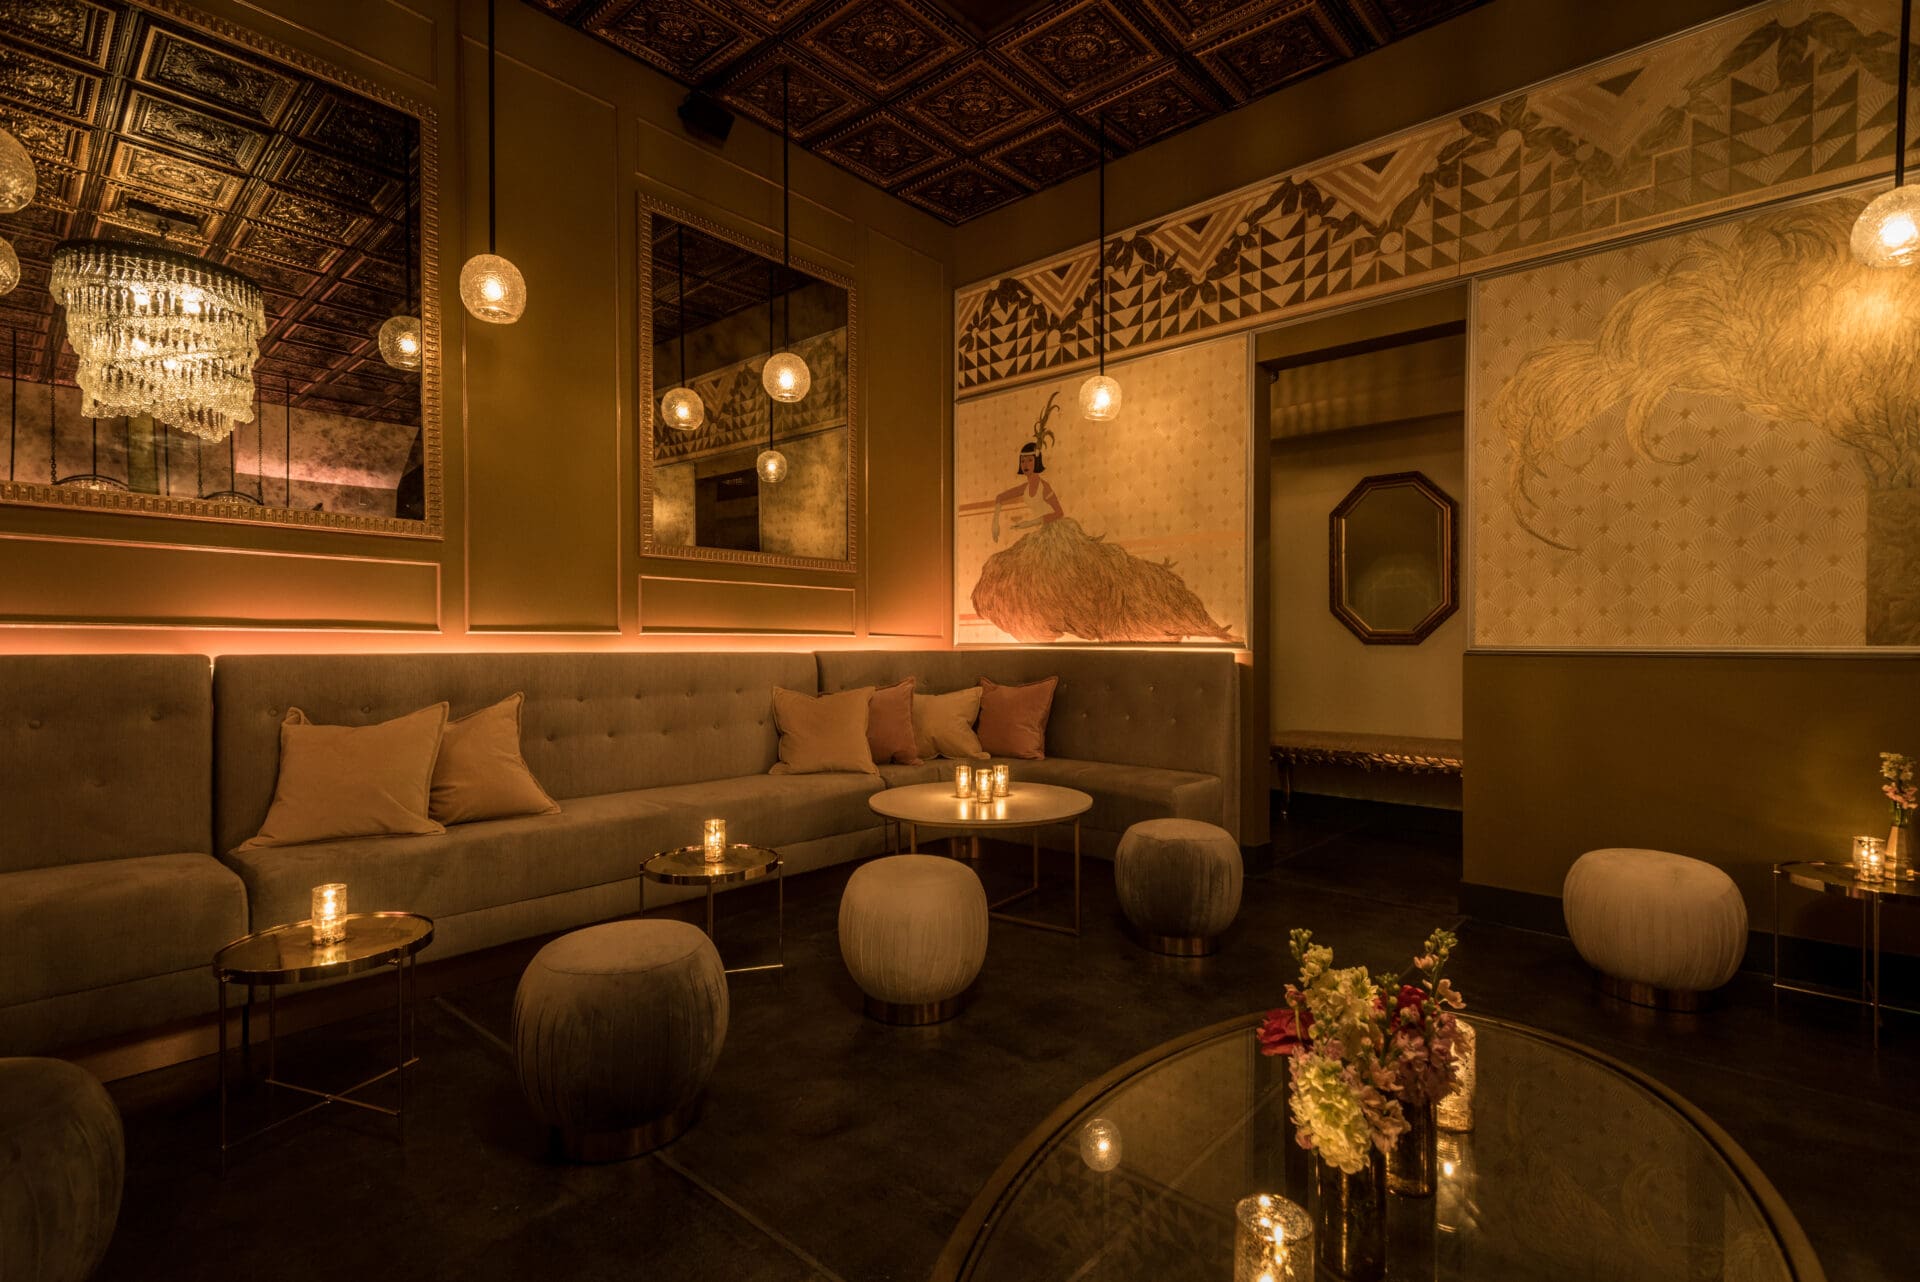 LA's best cocktail bar | A golden-hued low-lit room with low tables and stools and plush sofas at LA cocktail bar Genever